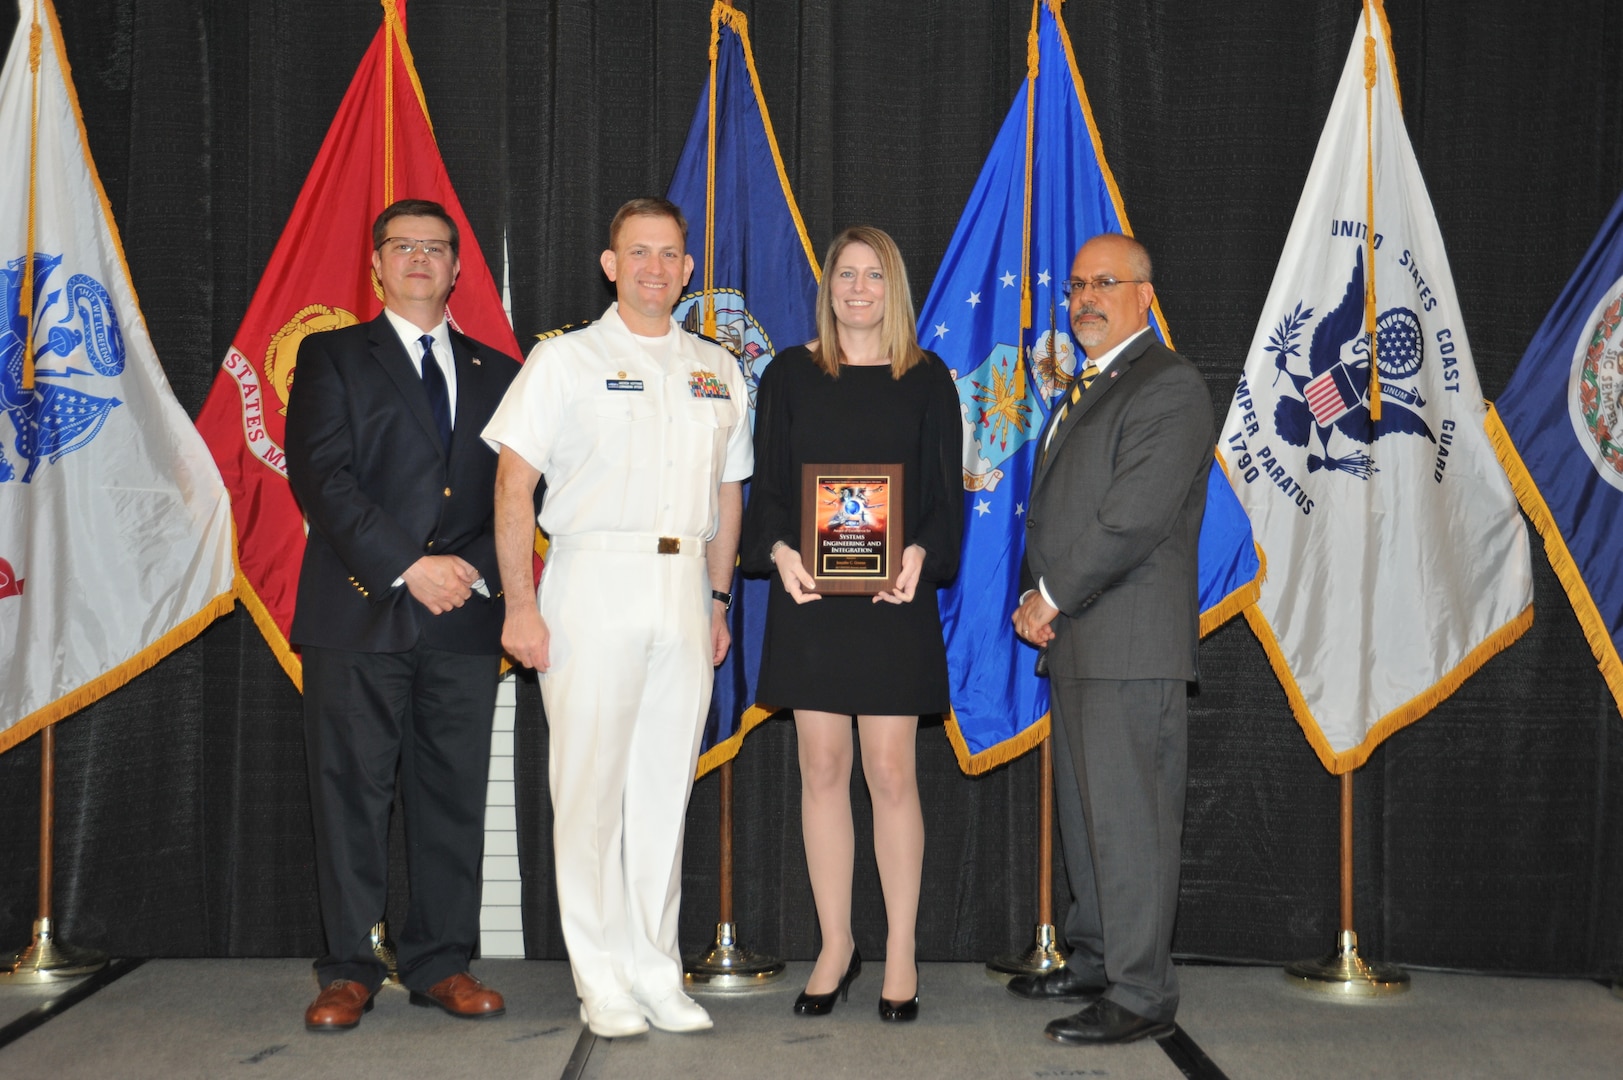 IMAGE: Jennifer Greene is presented the Award of Excellence for Systems Engineering and Integration at Naval Surface Warfare Center Dahlgren Division's annual awards ceremony, Apr. 26 at the Fredericksburg Expo and Conference Center.

The Award of Excellence for Systems Engineering and Integration was established to recognize individuals who have made a notable and significant impact to NSWCDD through their outstanding performance in systems engineering and integration.